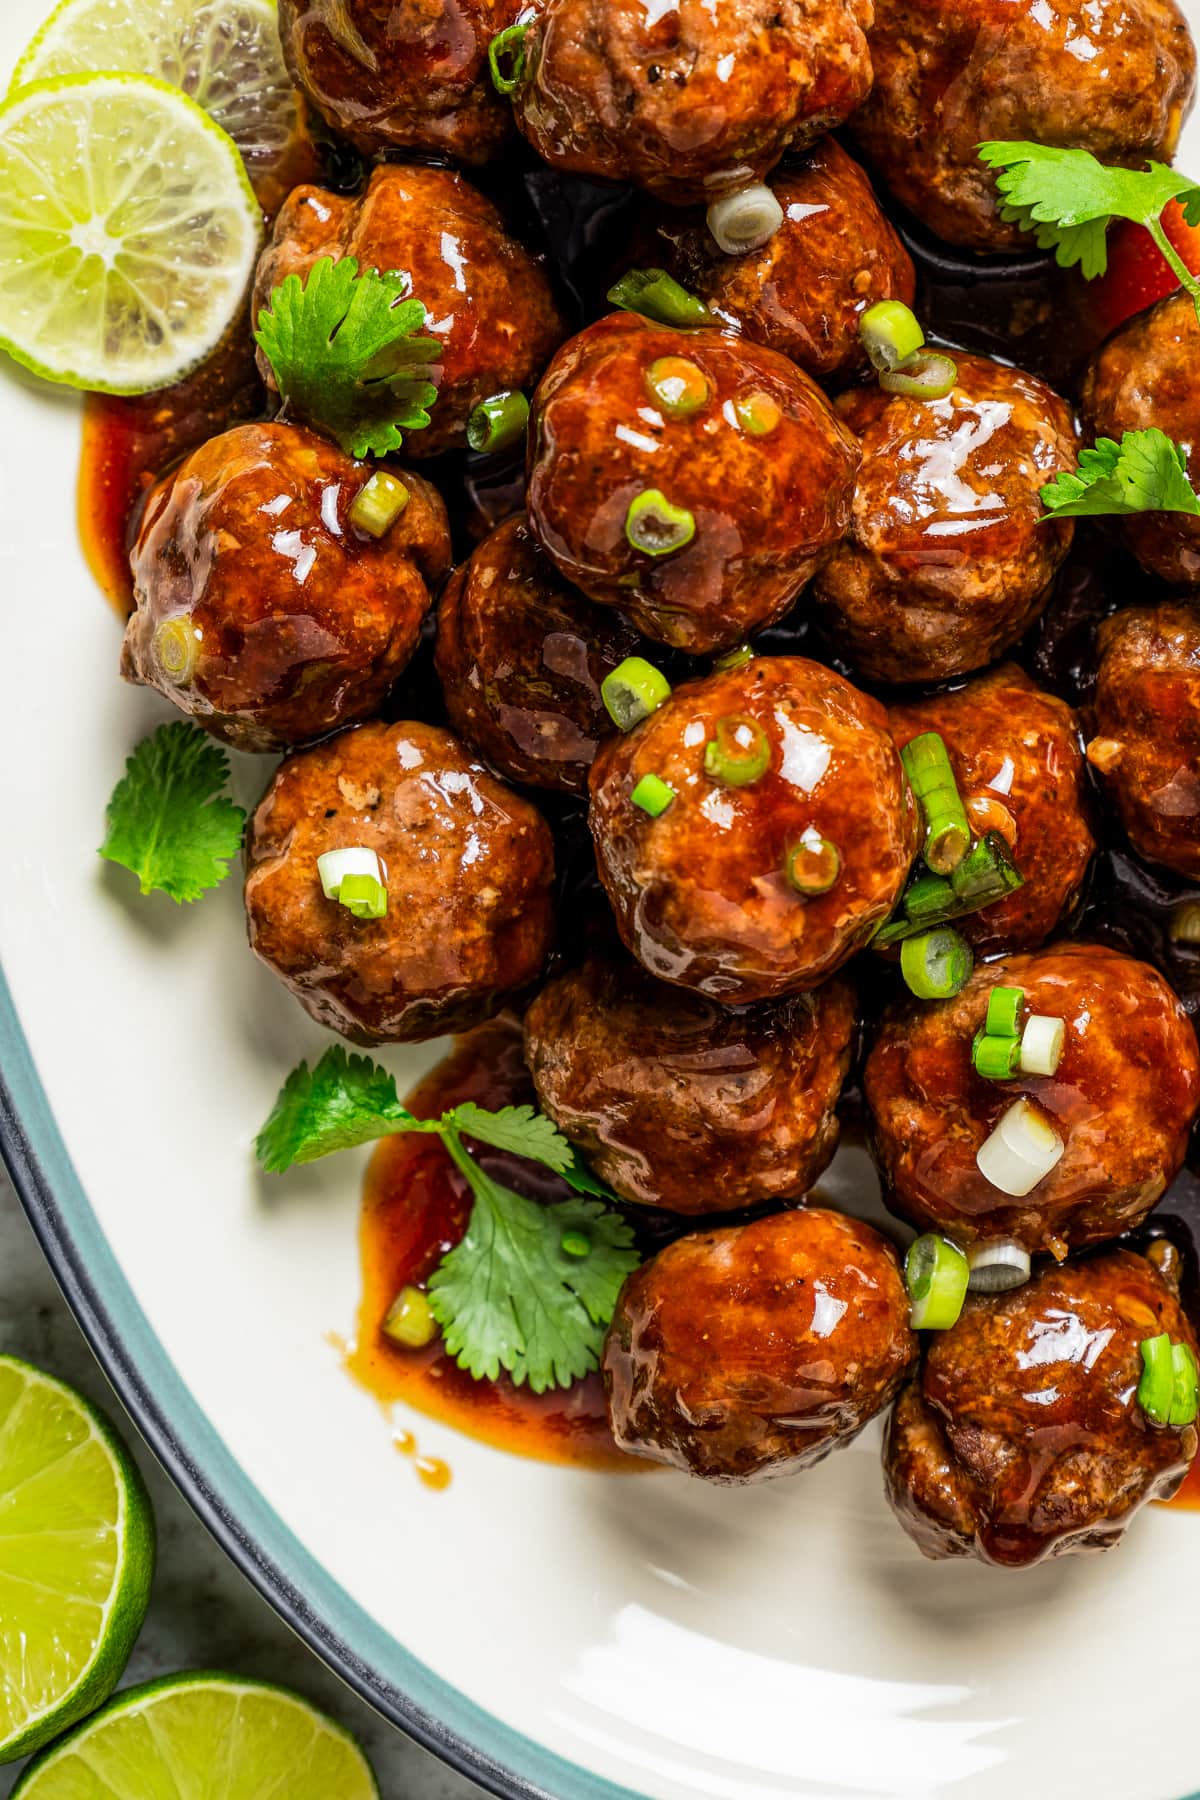 Close-up image of teriyaki meatballs arranged on a serving platter and garnished with herbs and green onions.